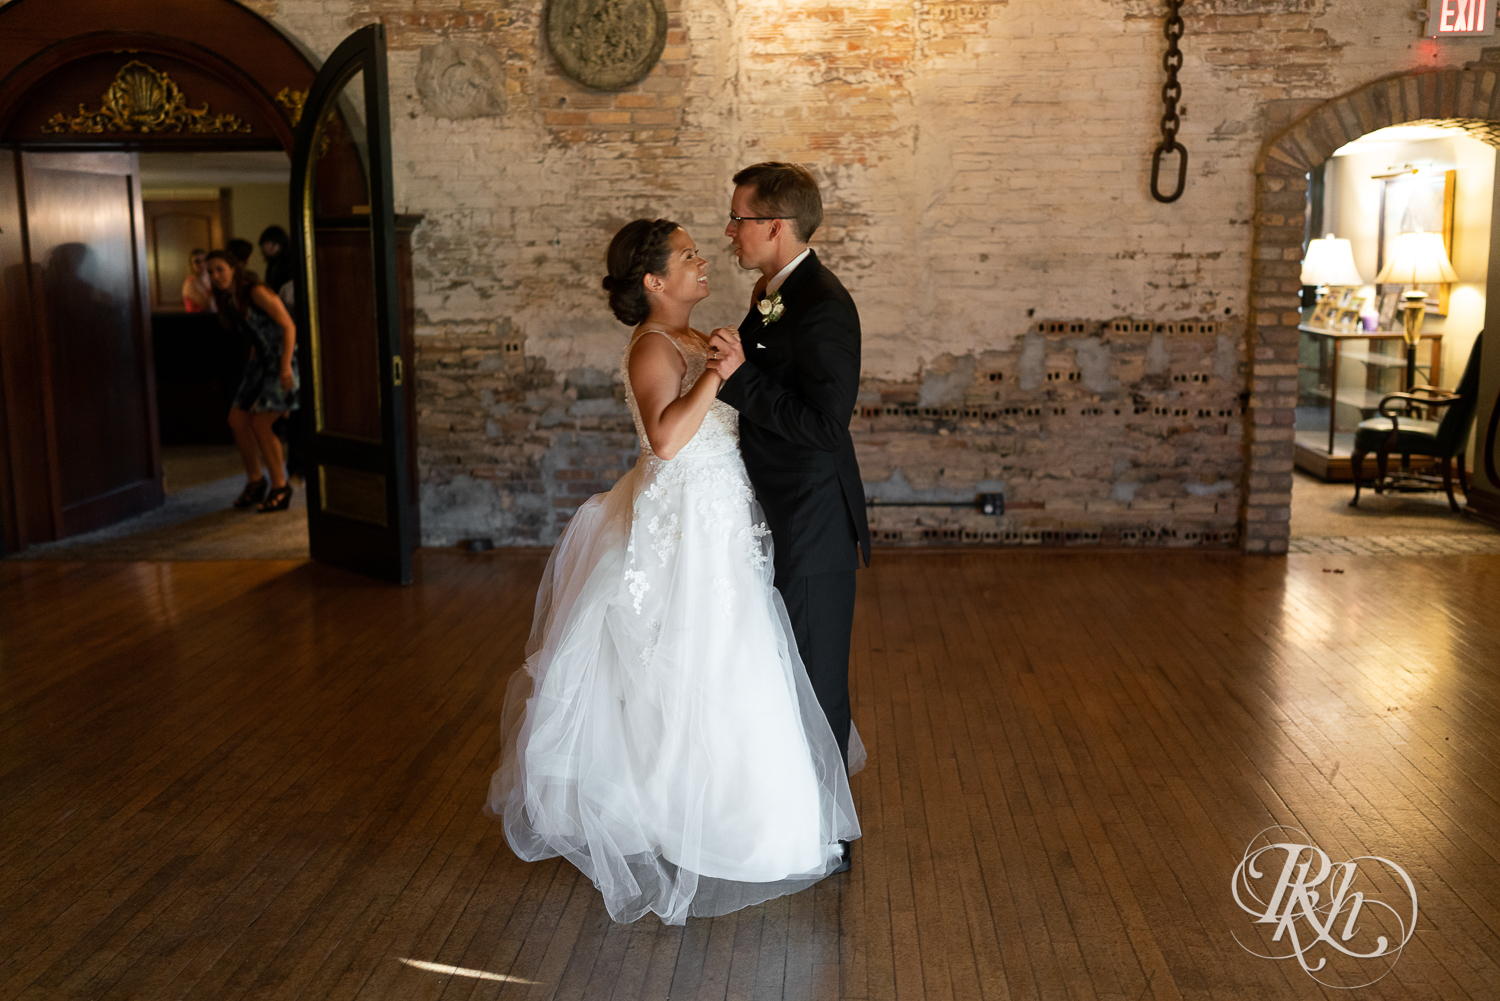 Bride and groom share first dance at wedding reception at Kellerman's Event Center in White Bear Lake, Minnesota.